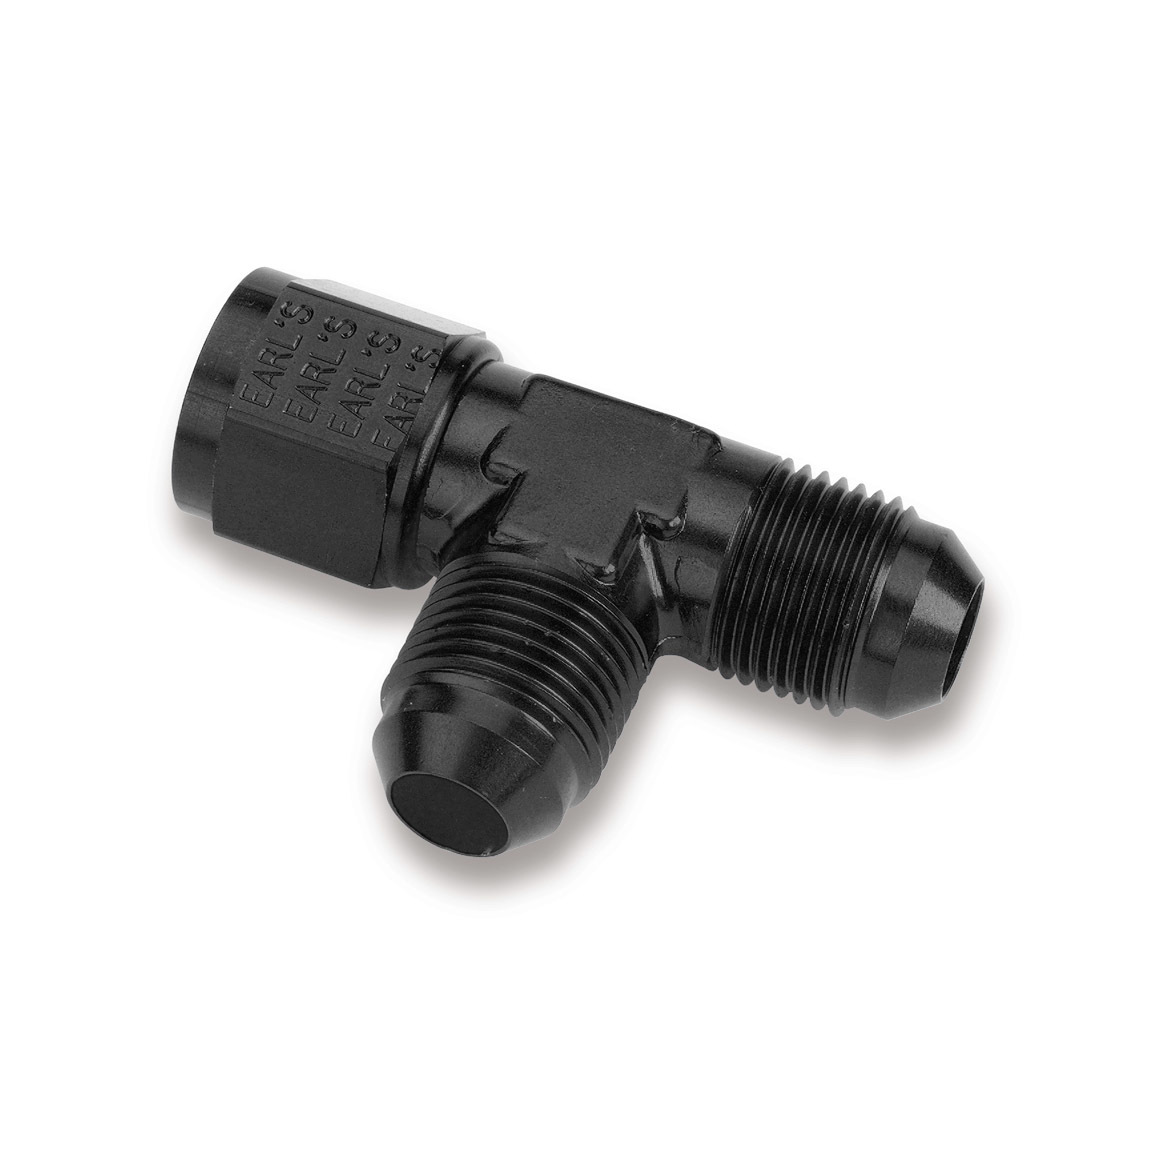 Earls AT926103ERL Fitting, Adapter Tee, 3 AN Female Swivel x 3 AN Male x 3 AN Male, Aluminum, Black Anodized, Each